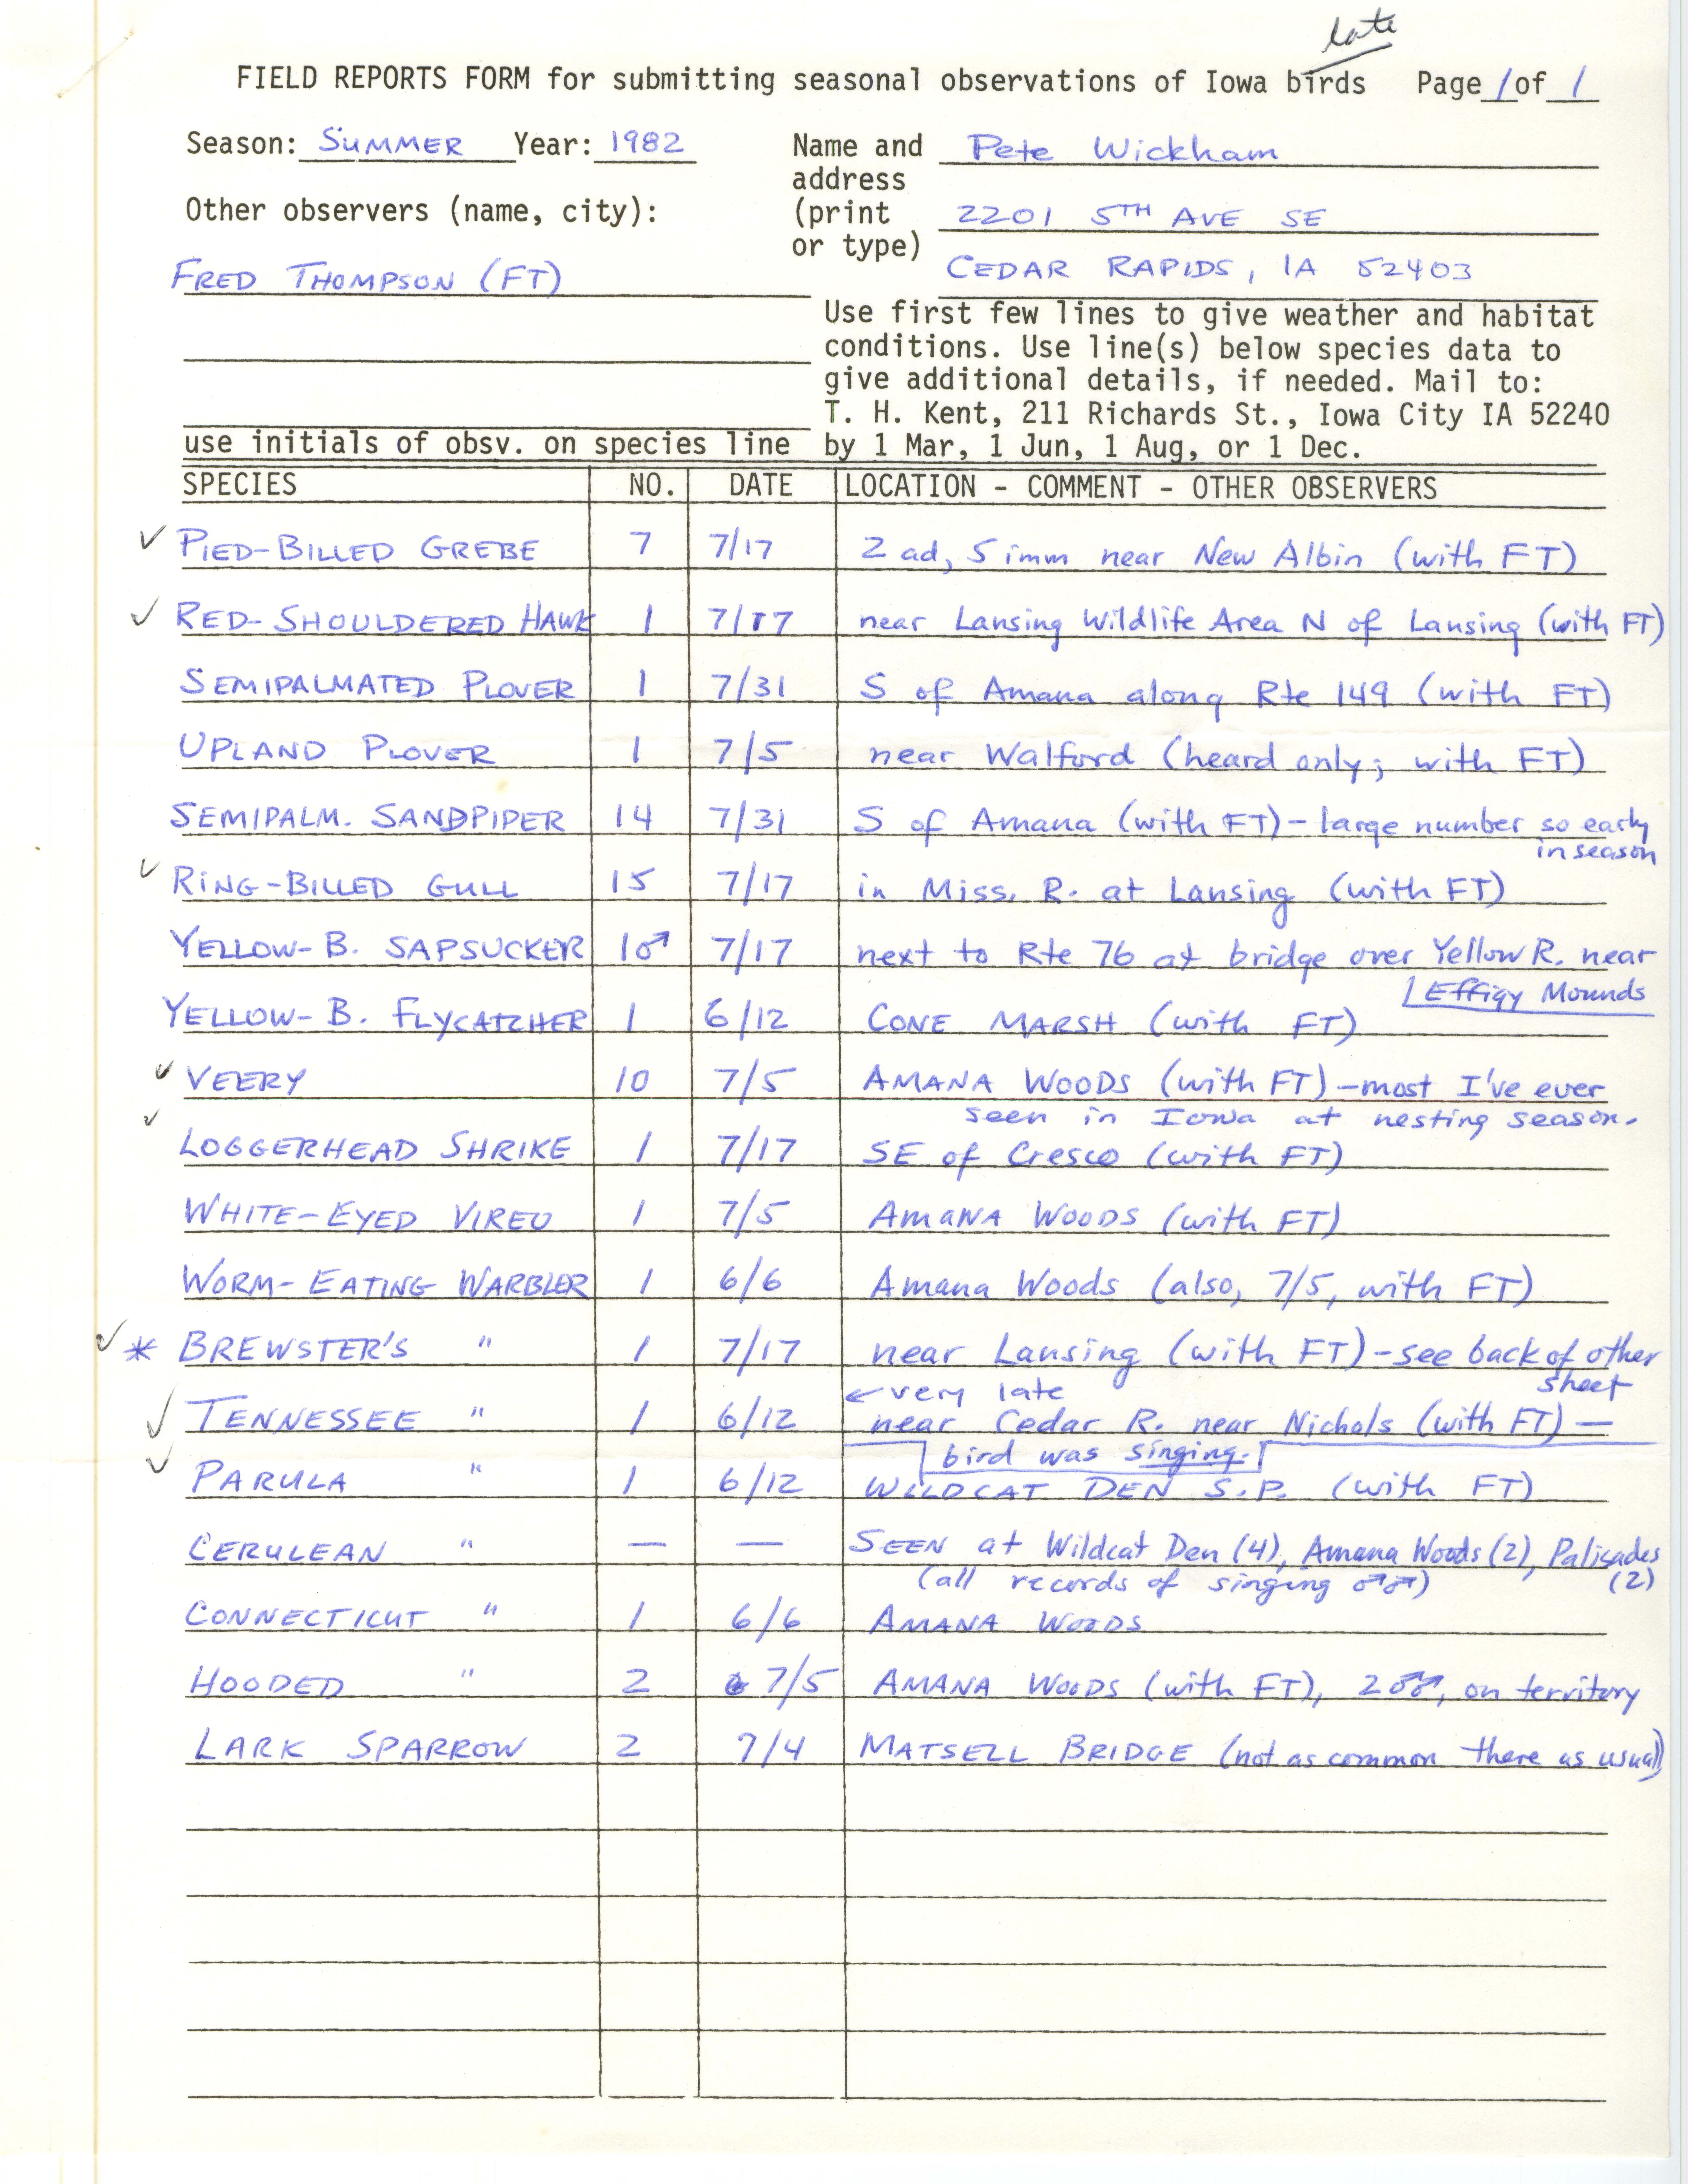 Field report and bird sightings checklist contributed by Peter P.  Wickham, summer 1982